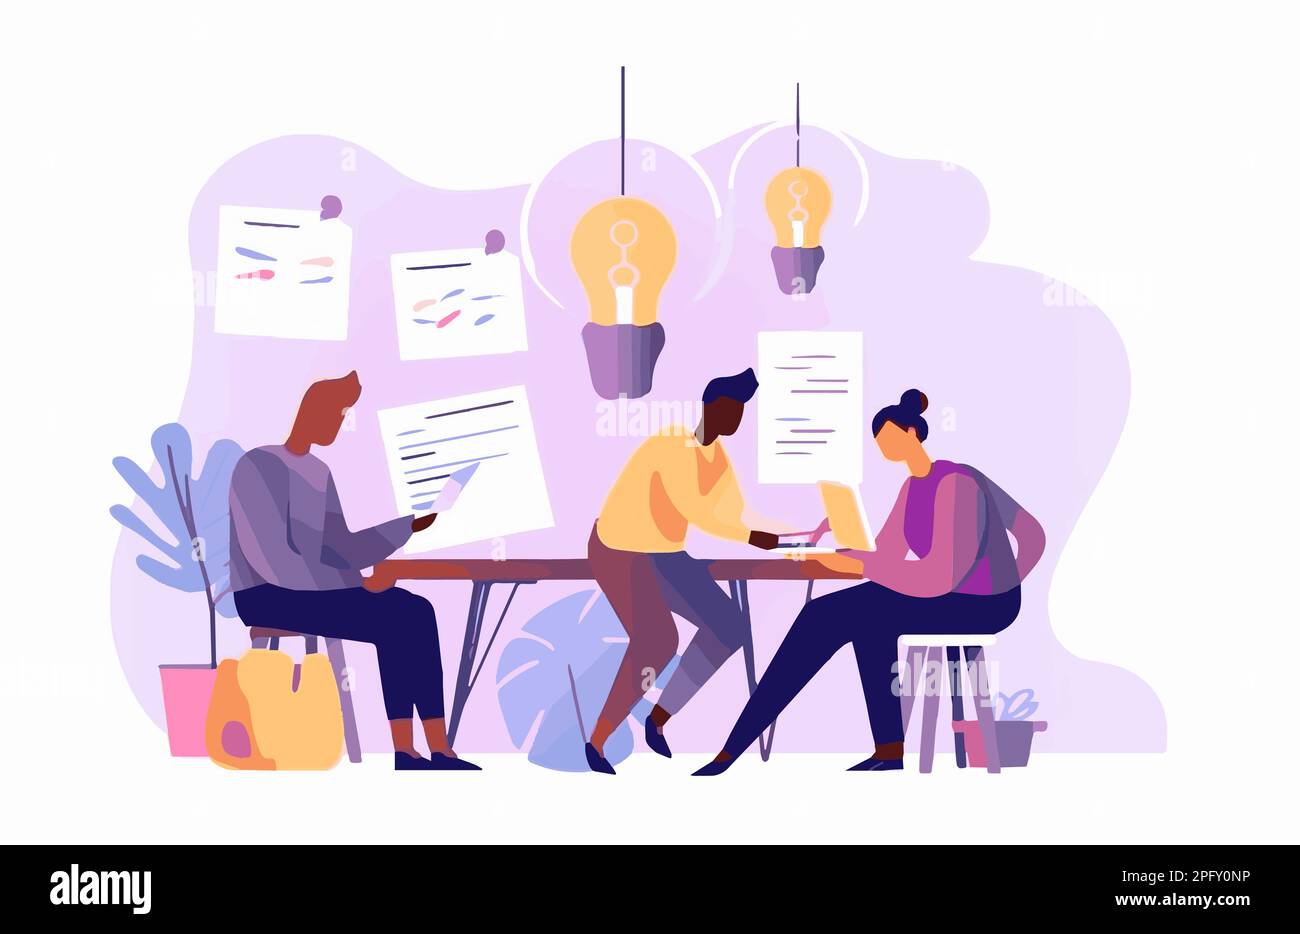 Diverse business team taking part in a brainstorming session, creative Idea generation vector illustration Stock Photo